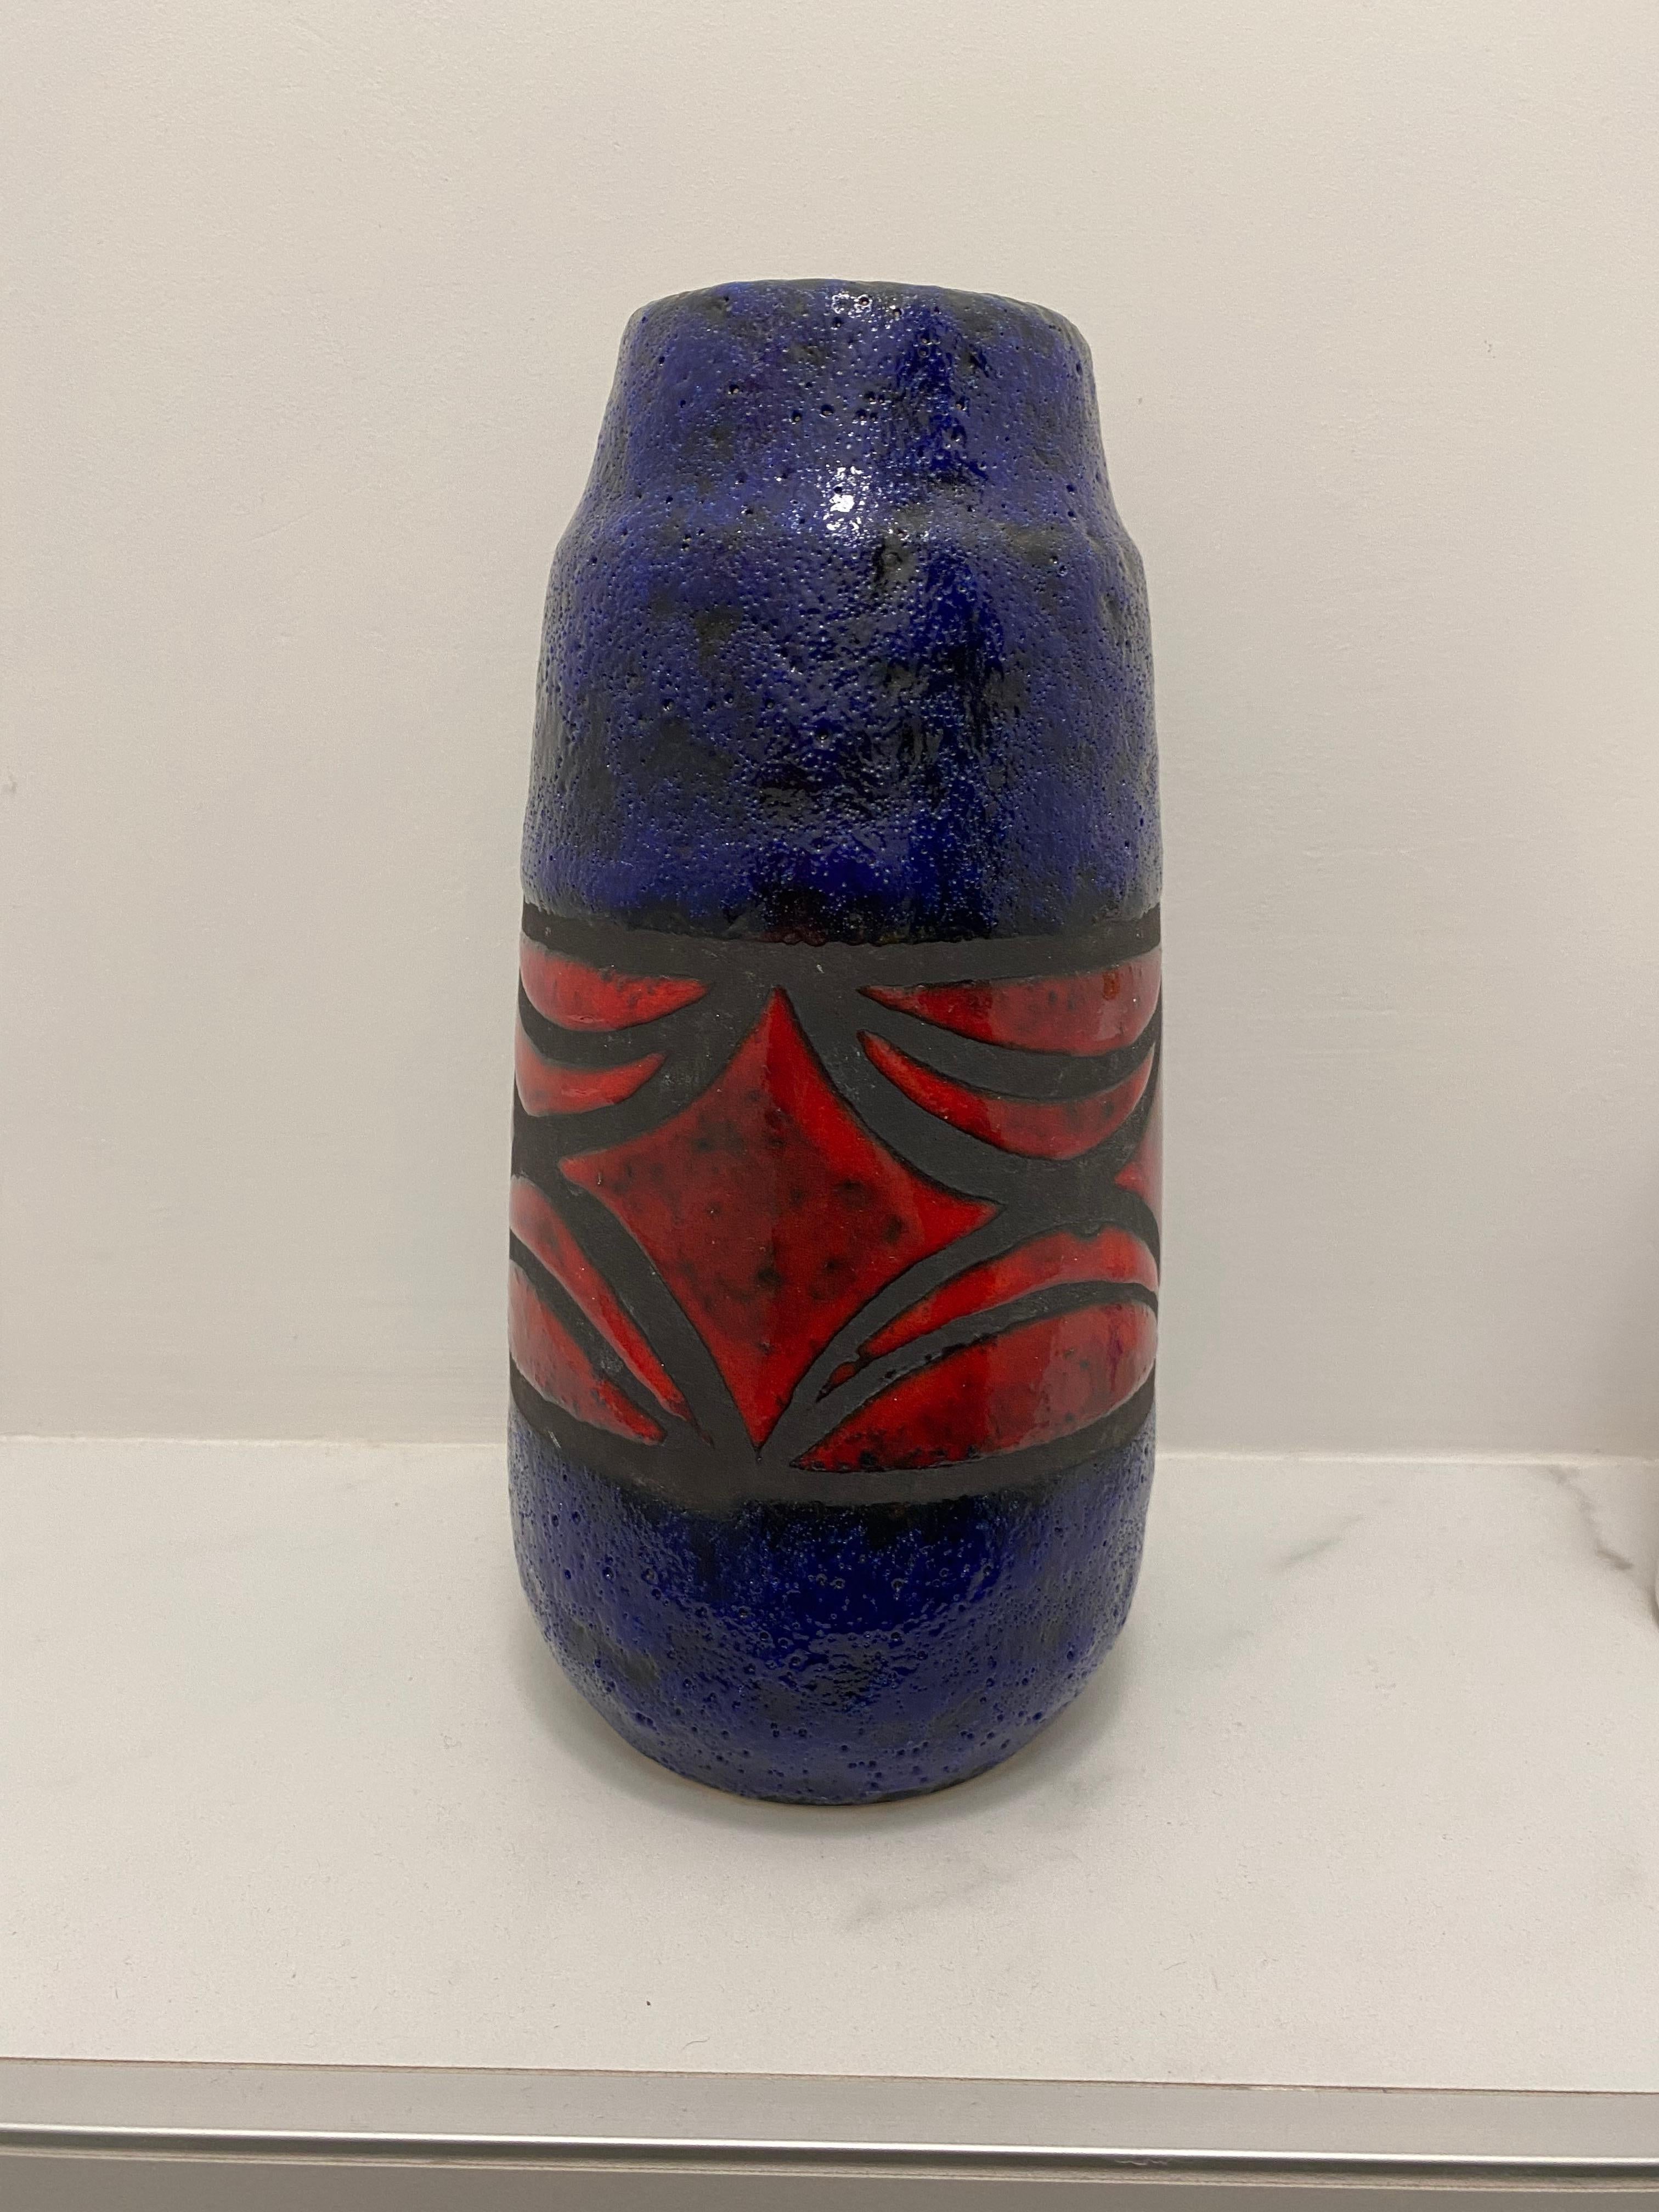 Nicely colored Fat Lava vase from the Seventies.